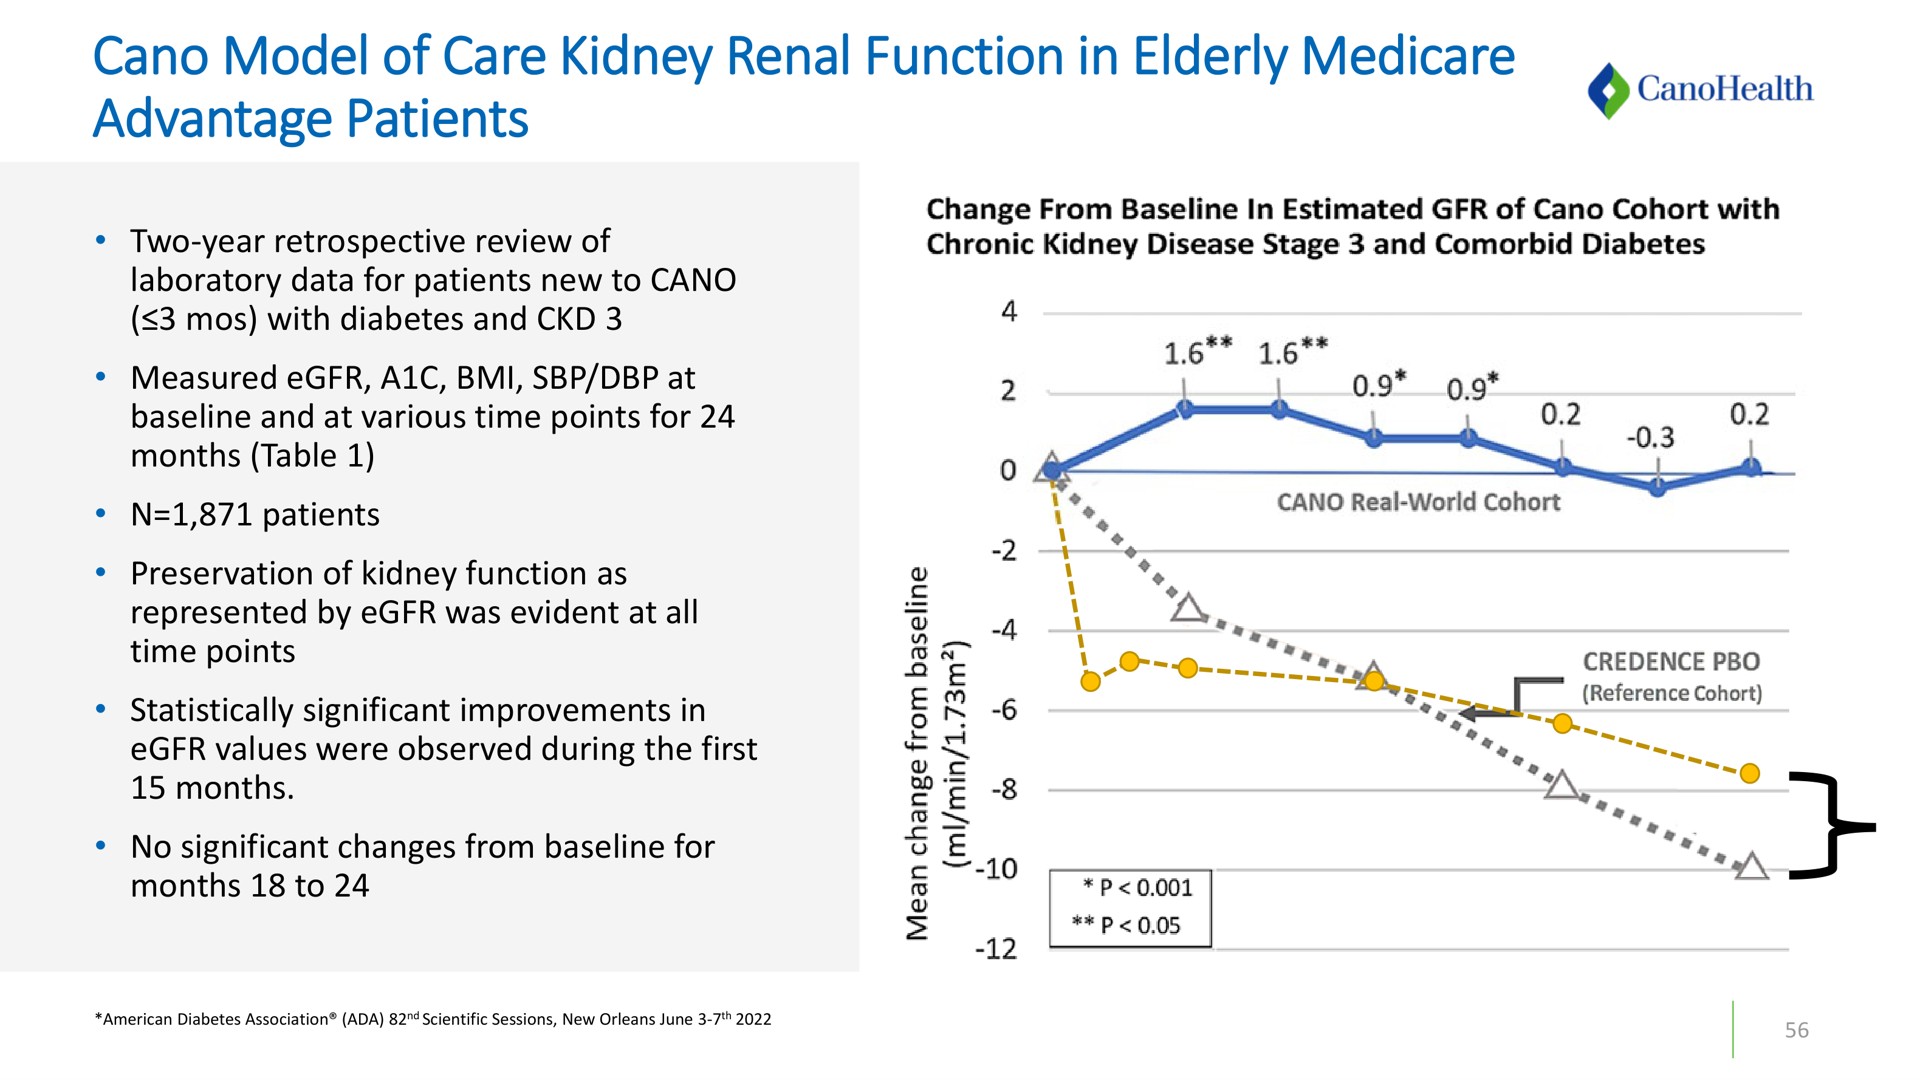 model of care kidney renal function in elderly advantage patients months to | Cano Health